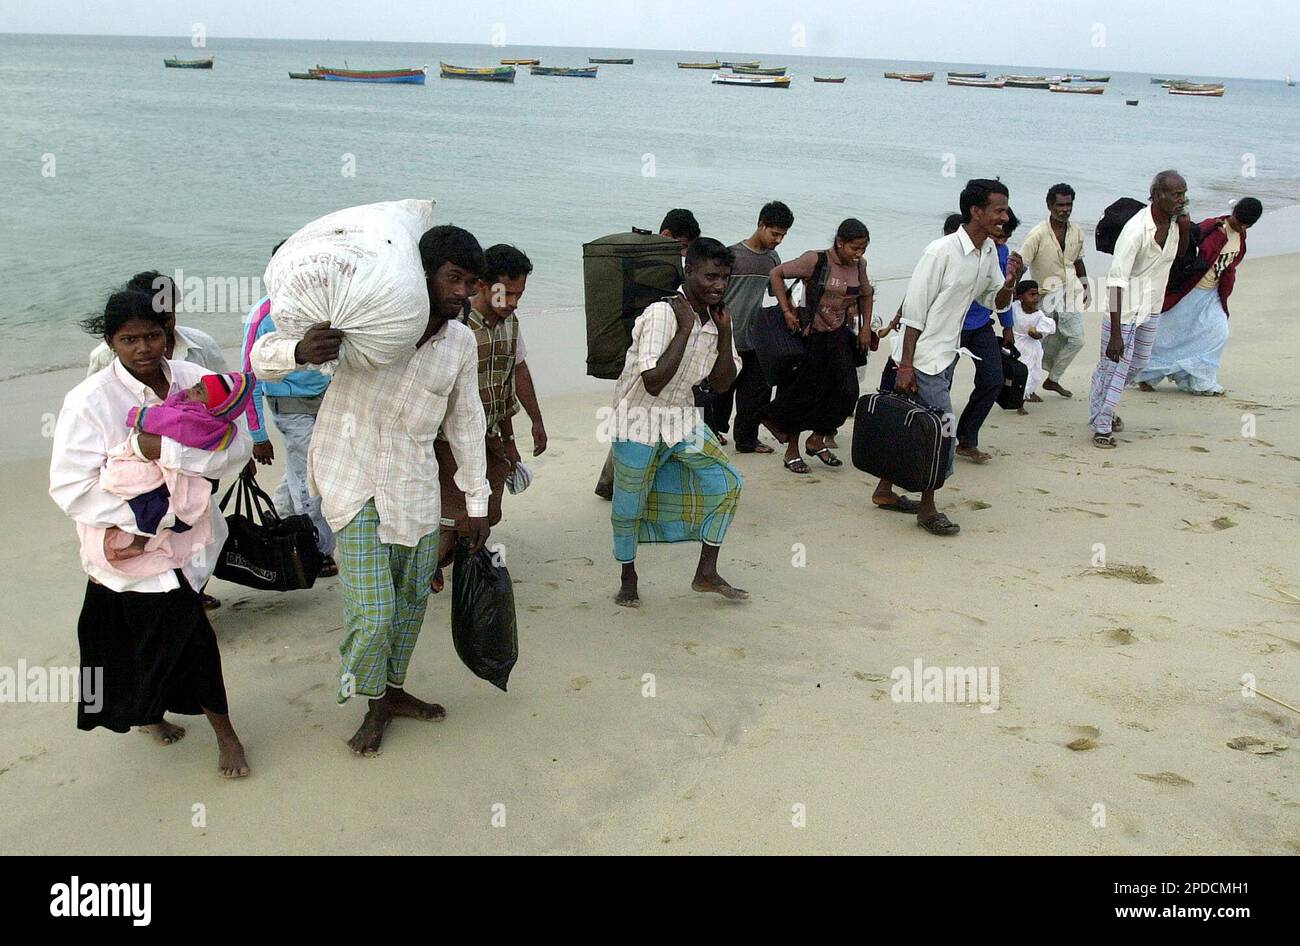 Sri Lankan Tamil Refugees Walk On The Beach After Arriving On Boats At